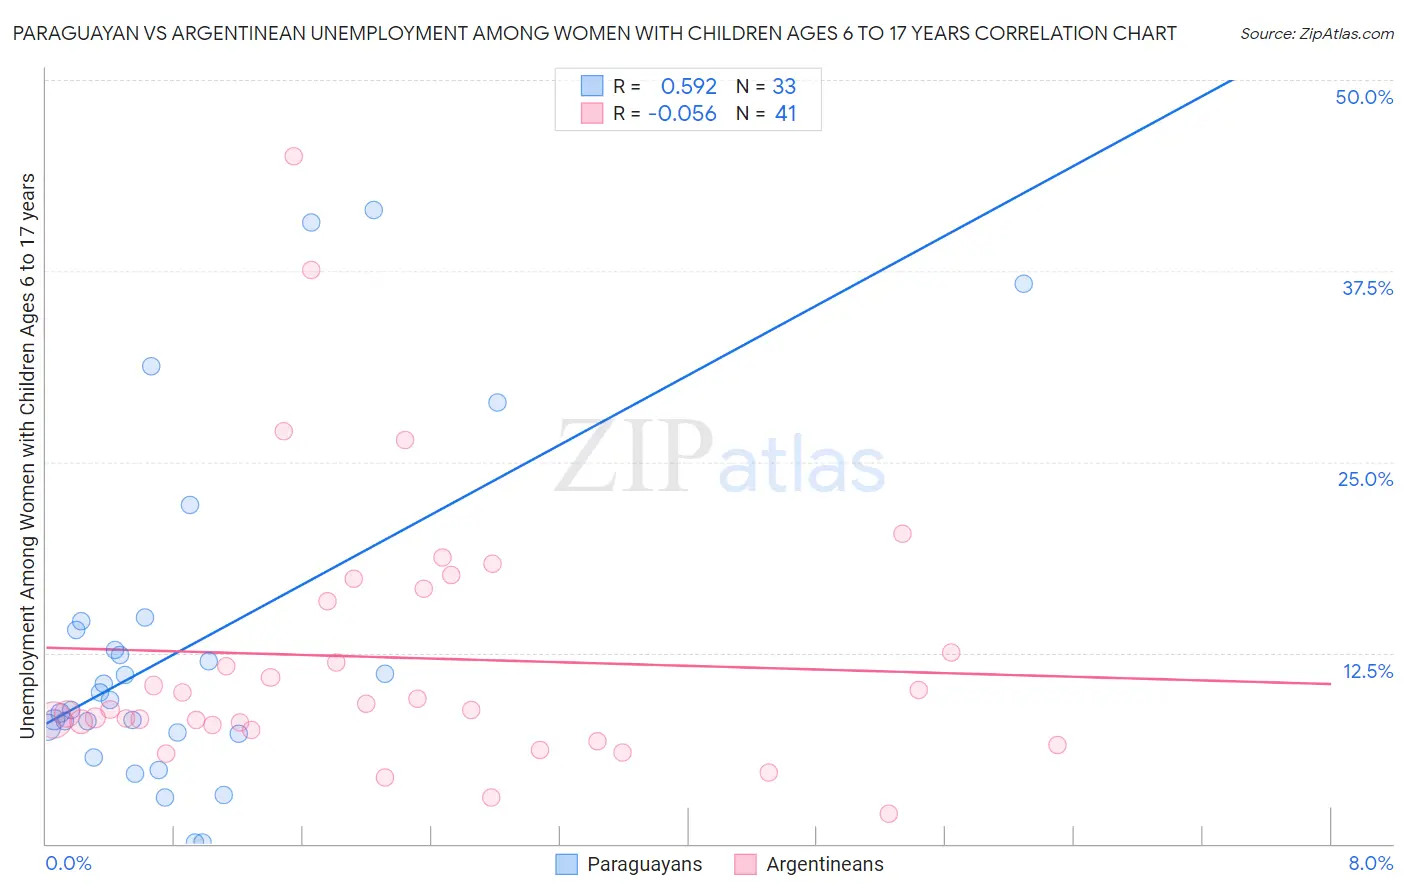 Paraguayan vs Argentinean Unemployment Among Women with Children Ages 6 to 17 years